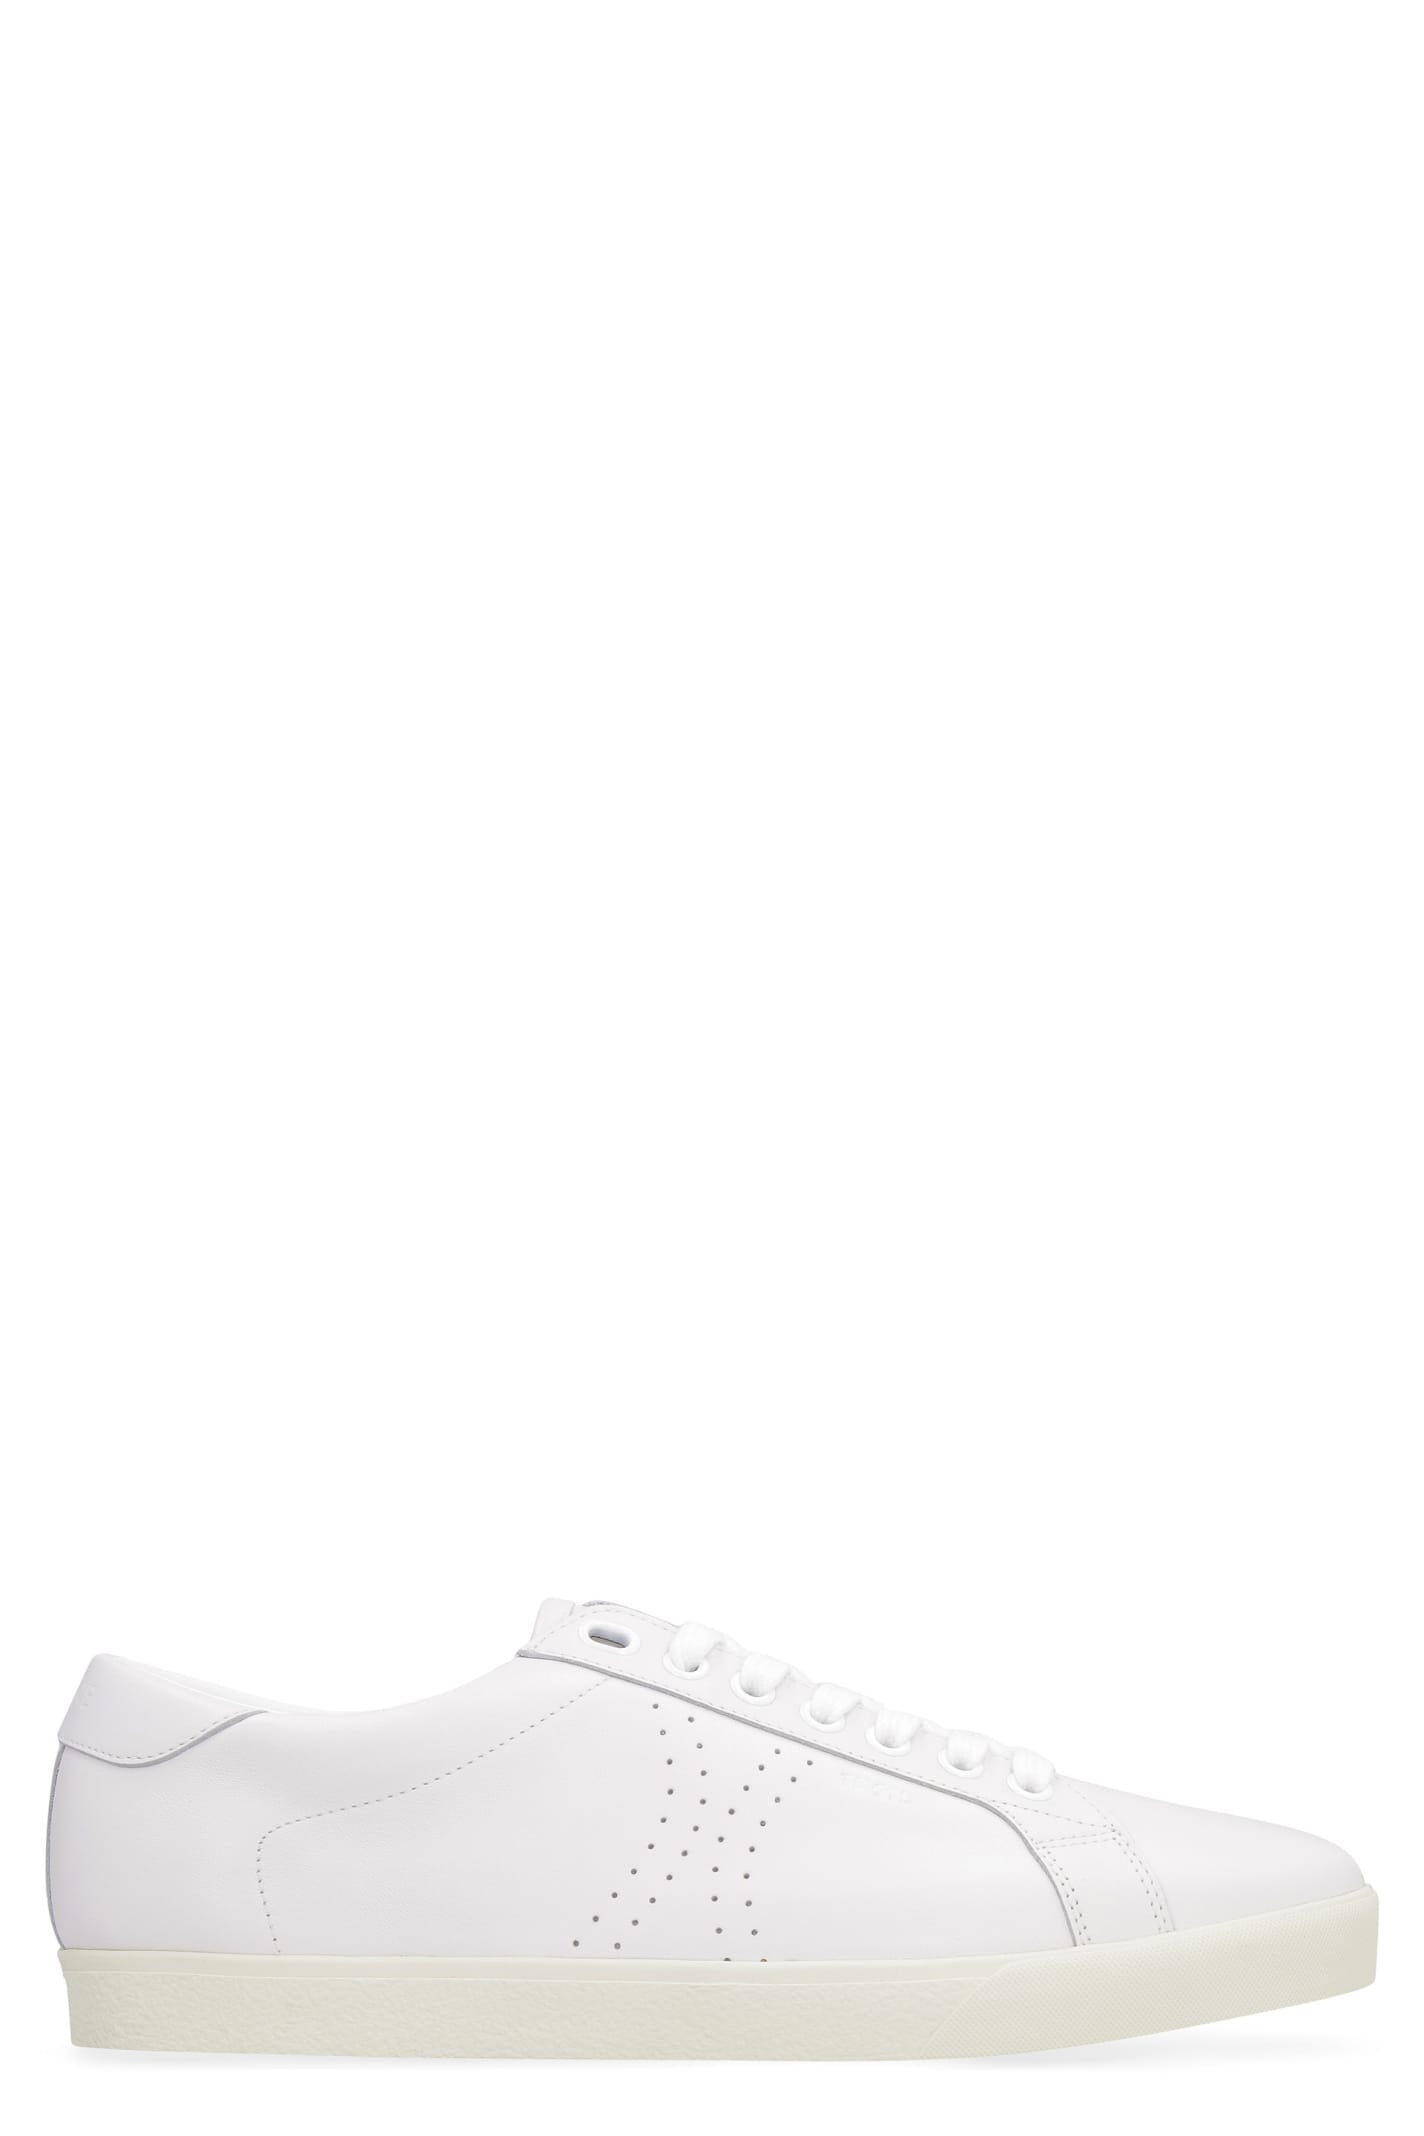 Celine Triomphe Leather Low-top Sneakers